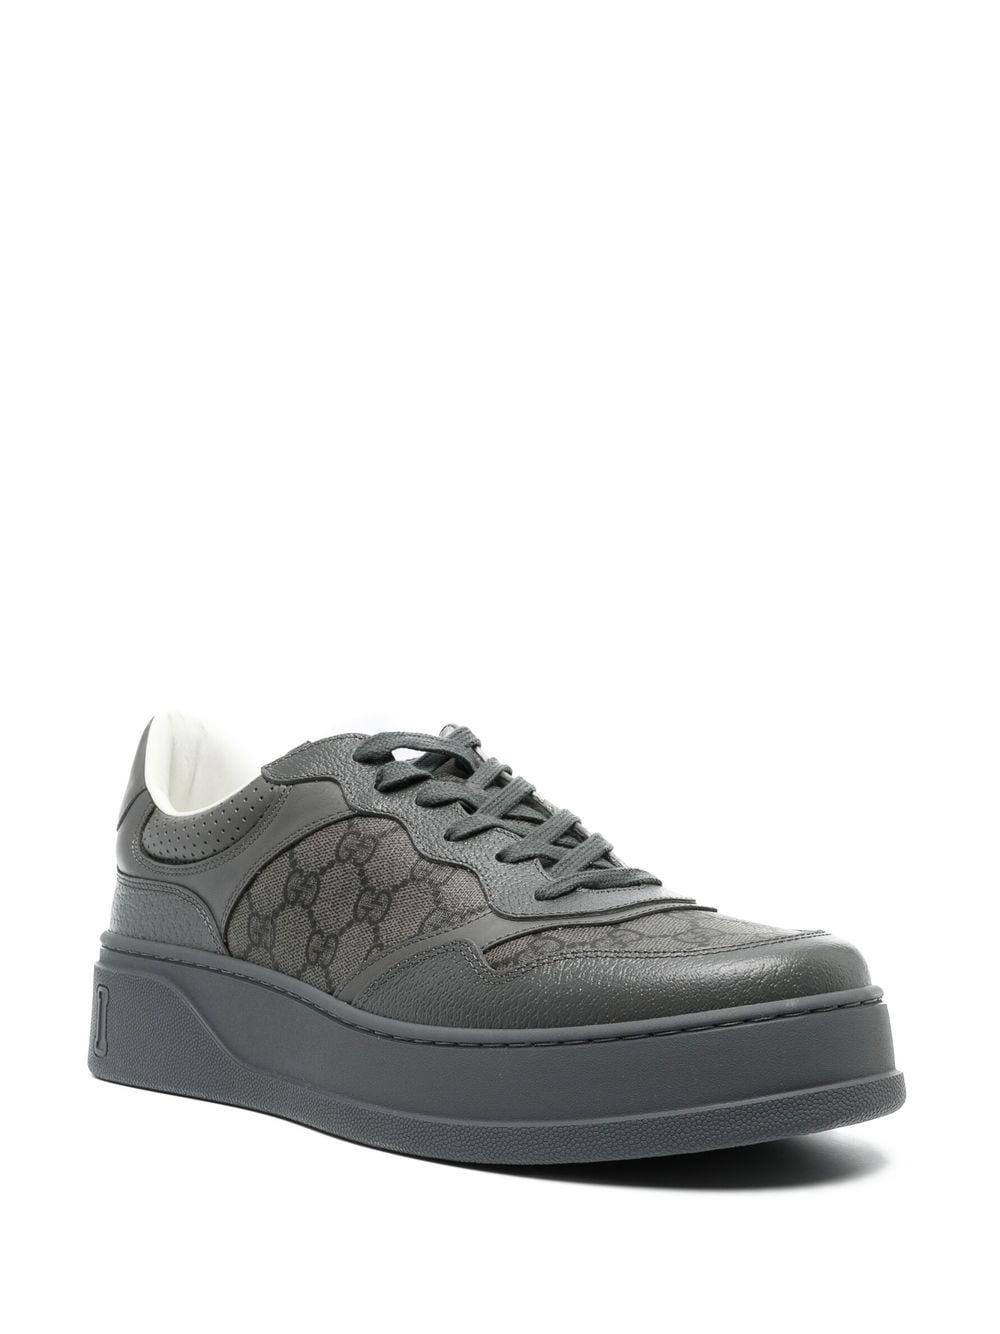 Gucci Chunky B Low-top Sneakers in Gray for Men | Lyst